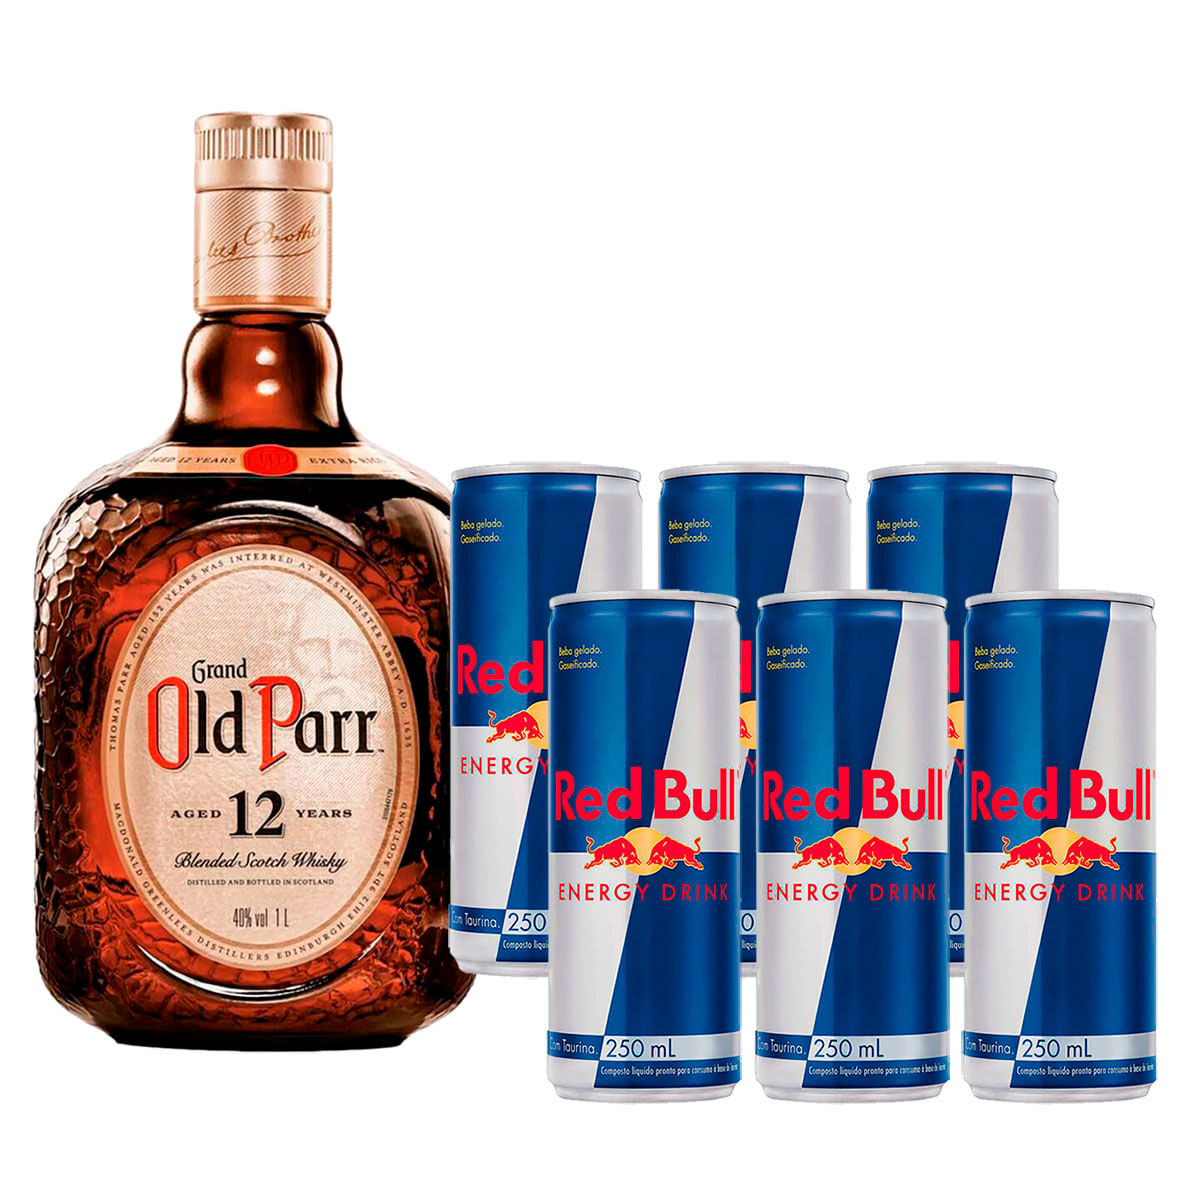 whisky-old-parr-1l-+-energetico-red-bull-energy-drink-250ml-pack-com-6-unidades-1.jpg